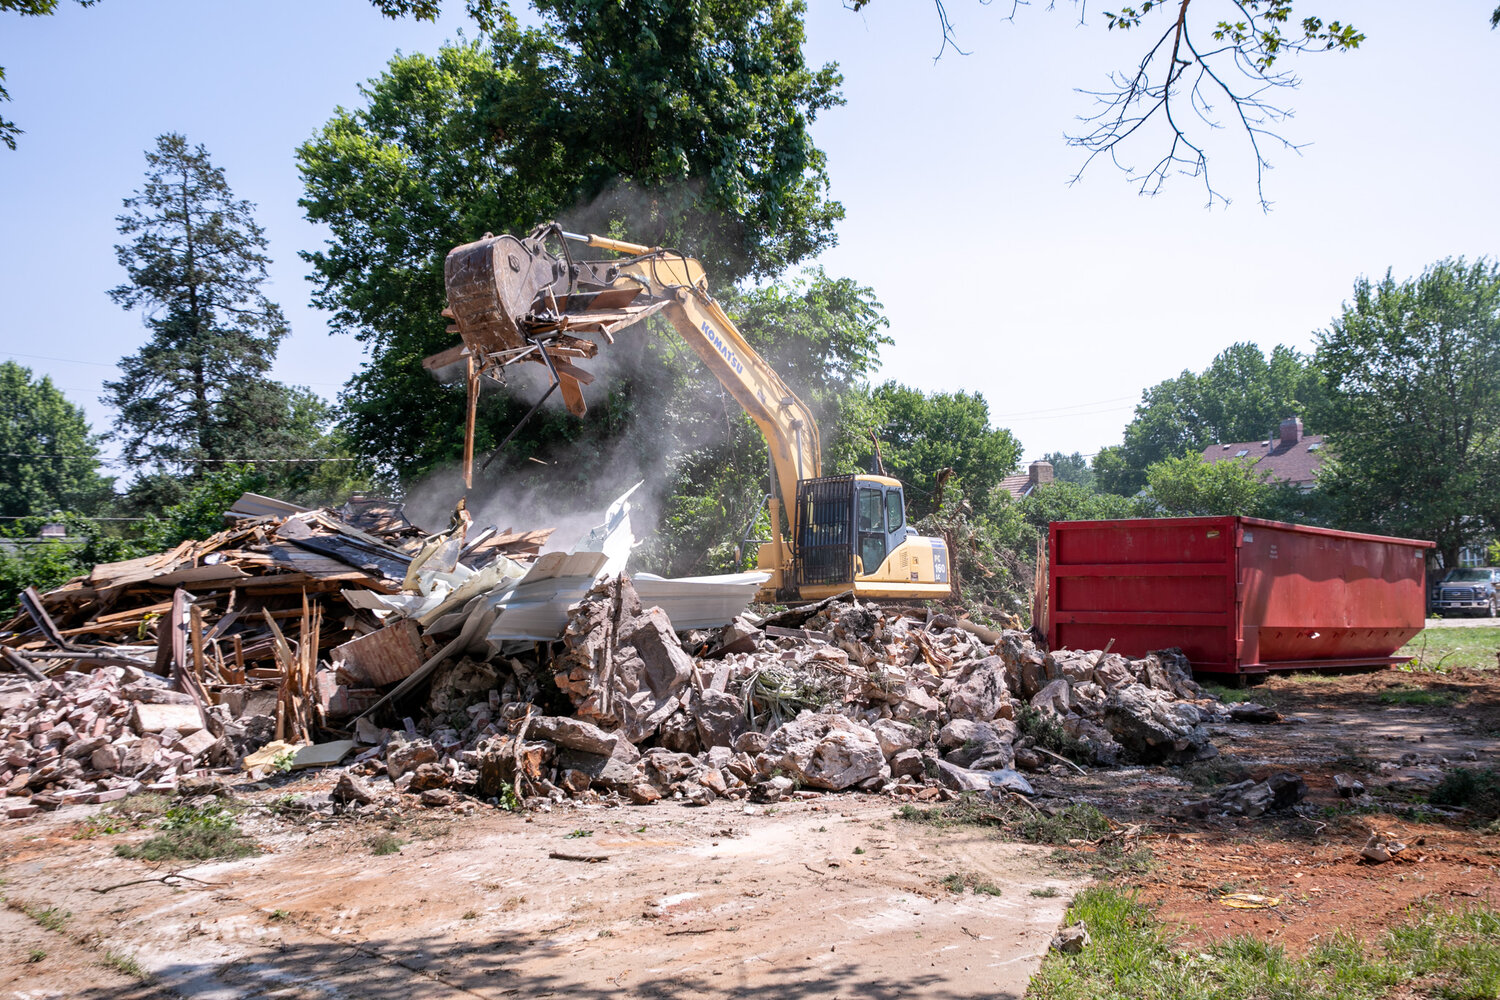 A four-bedroom cottage at 1133 E. Sunshine St., built in 1936, according to Zillow, was torn down this morning.